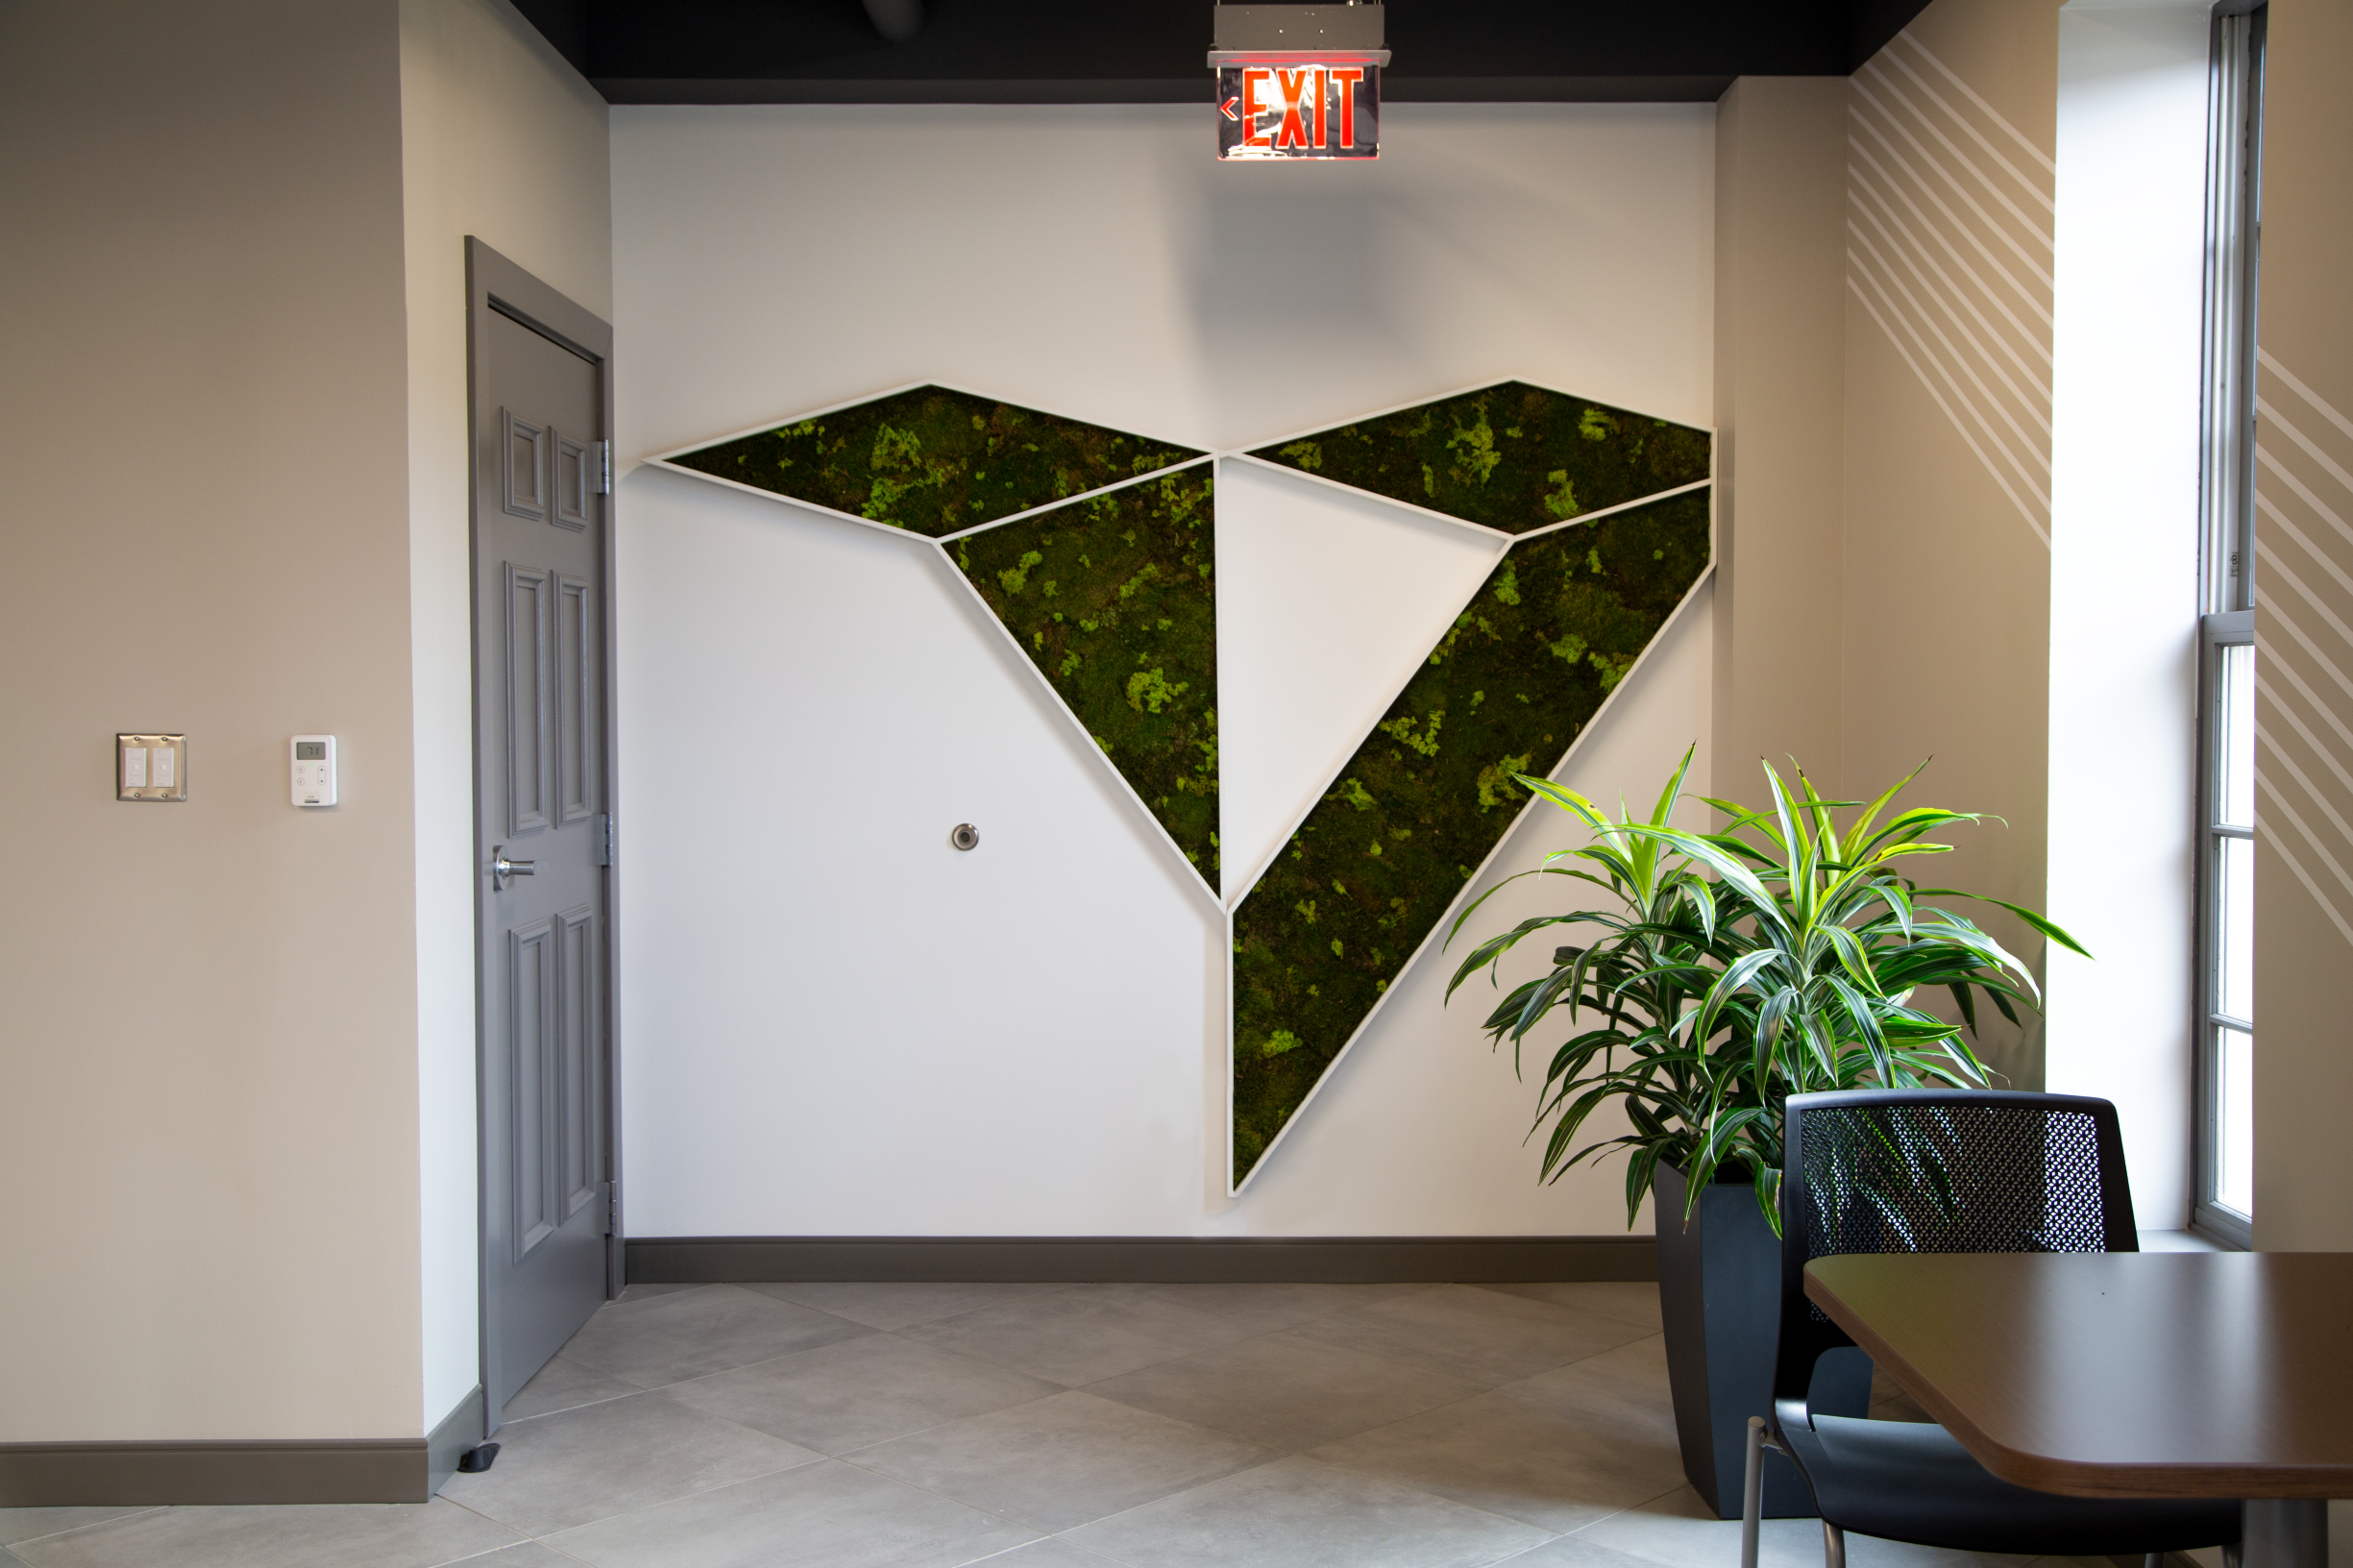 Venture Visionary Partners worked with Continental Office Branding and Furniture to create an amazing space in Toledo Sylvania OH